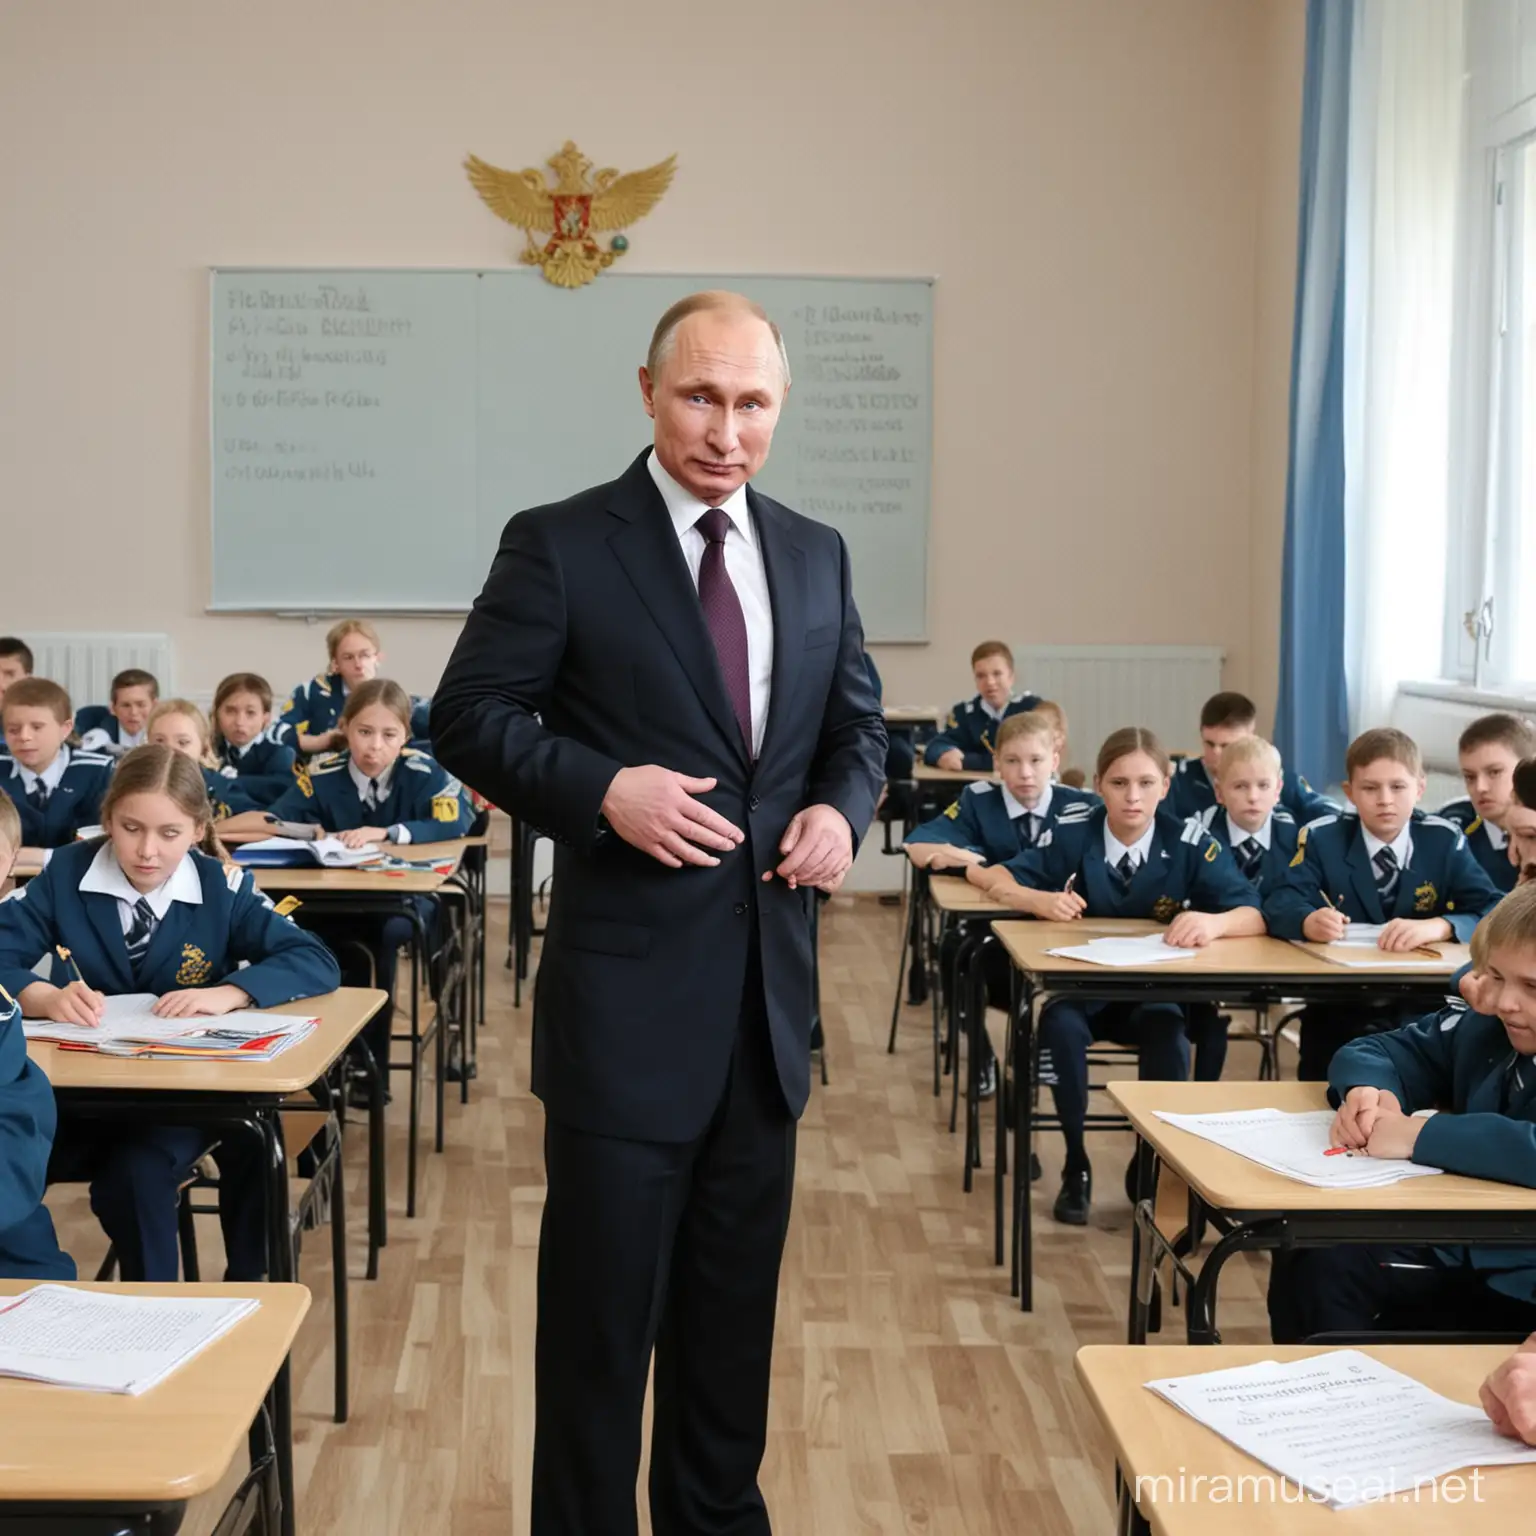 Russian Educator Engaging Students in a Classroom Setting